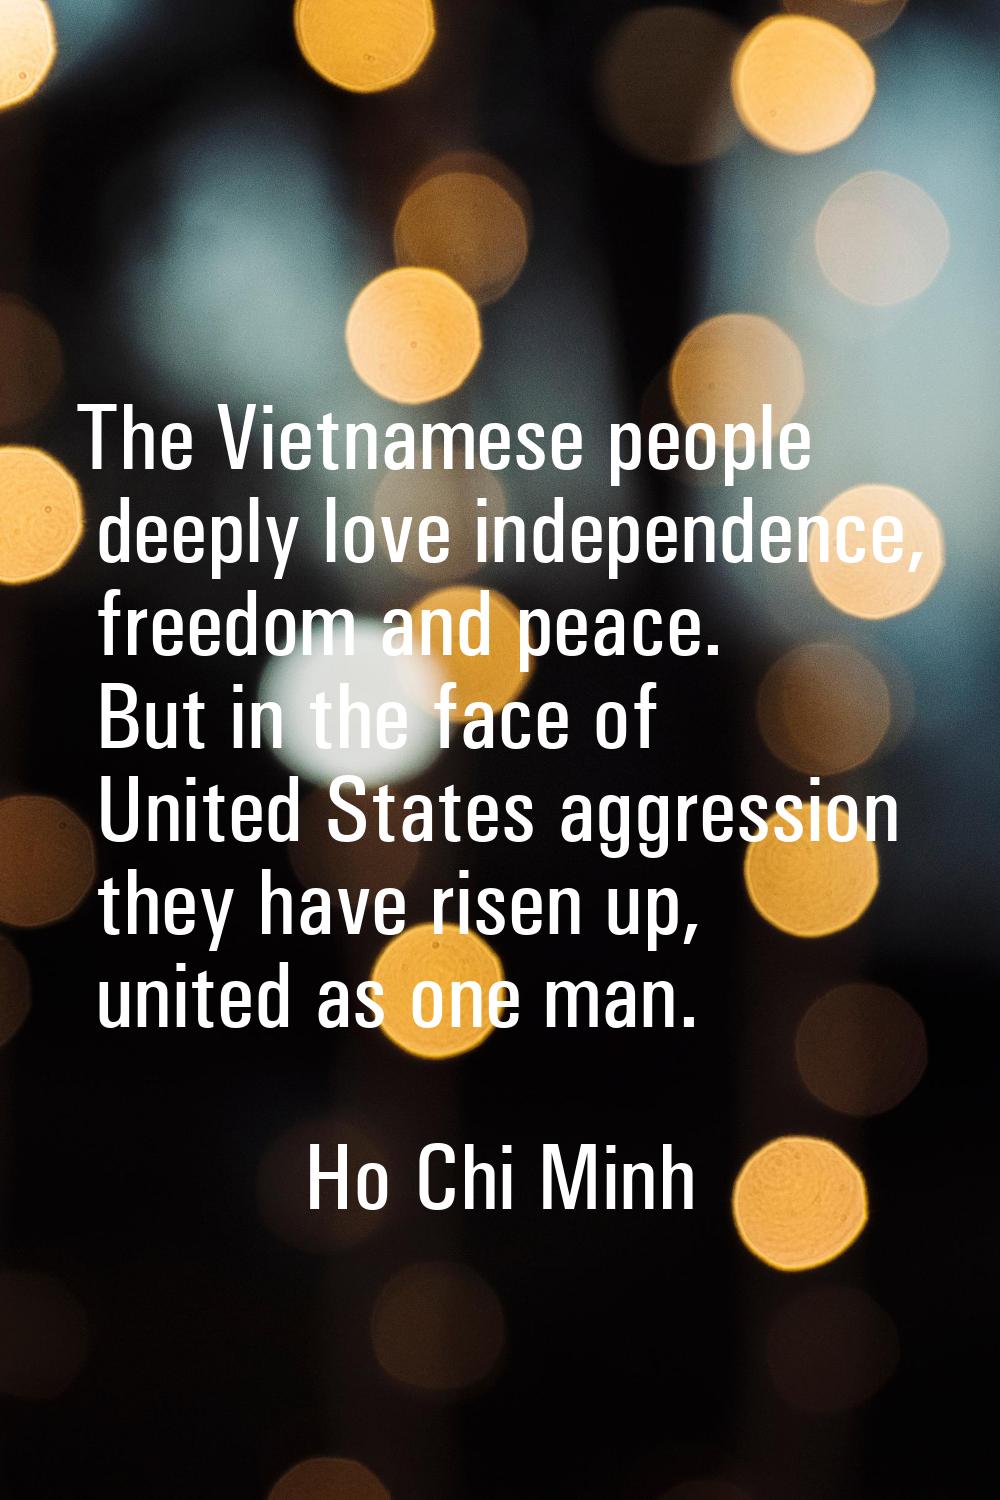 The Vietnamese people deeply love independence, freedom and peace. But in the face of United States